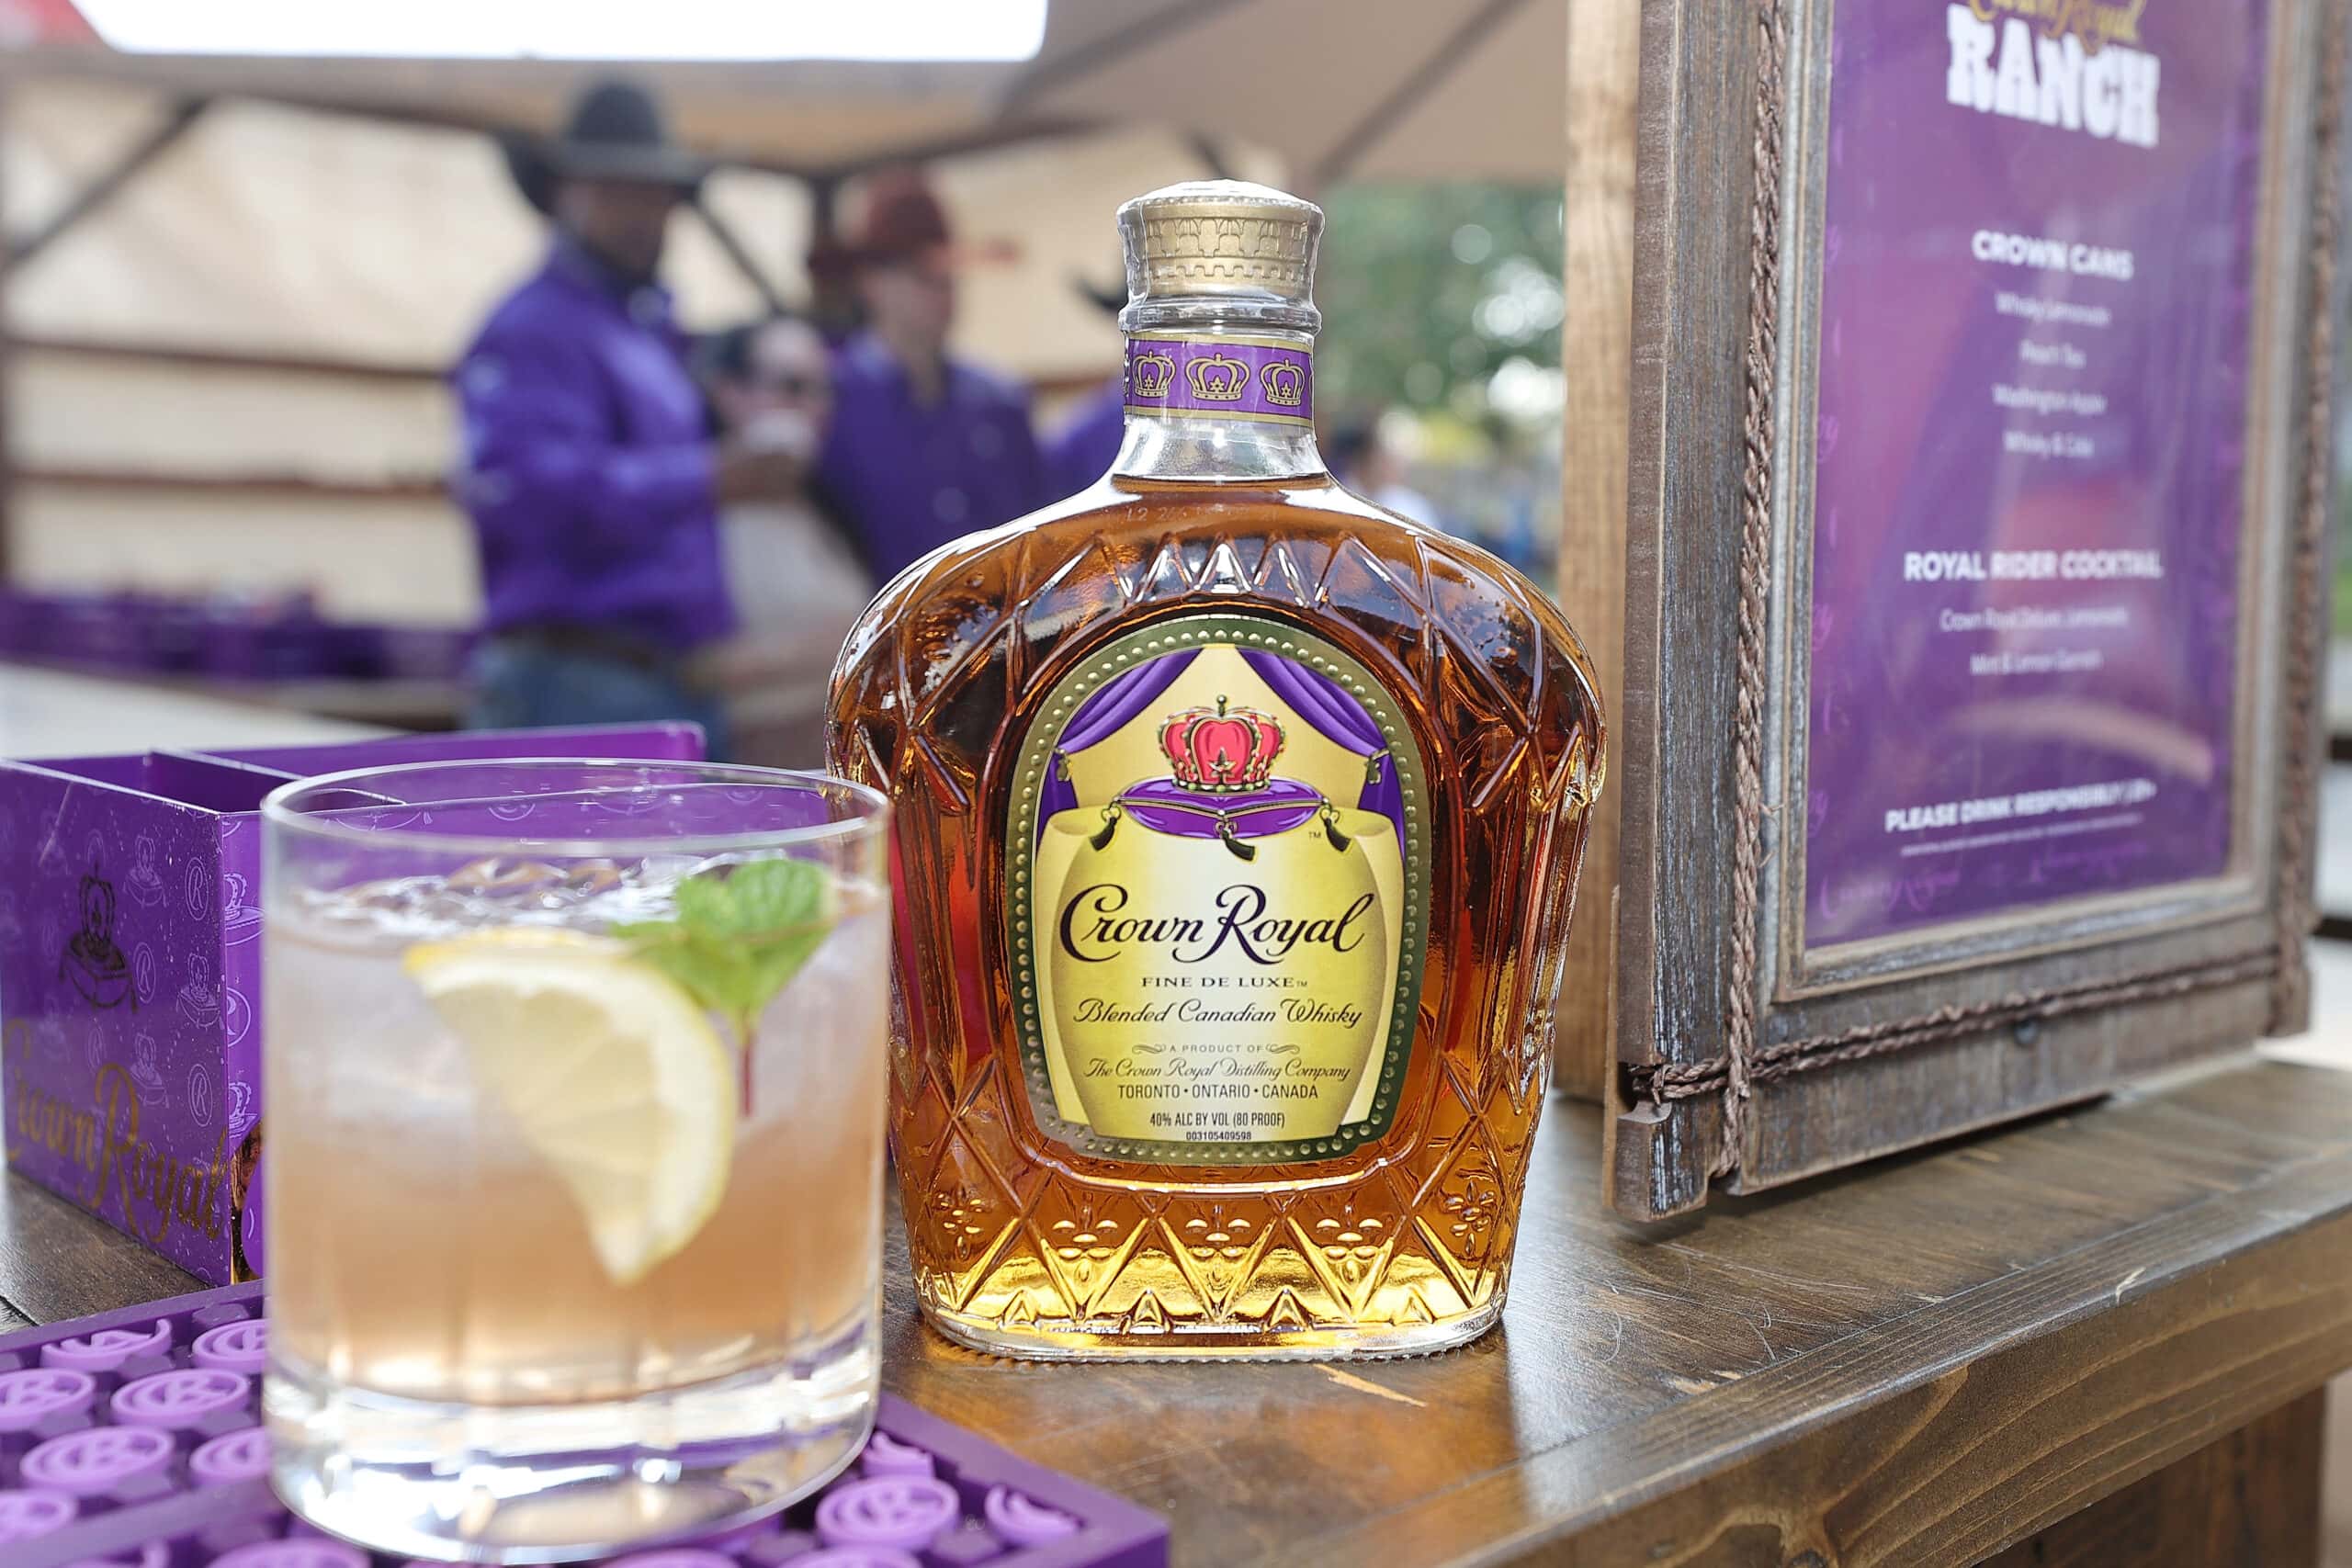 Crown Royal bottle and cocktail